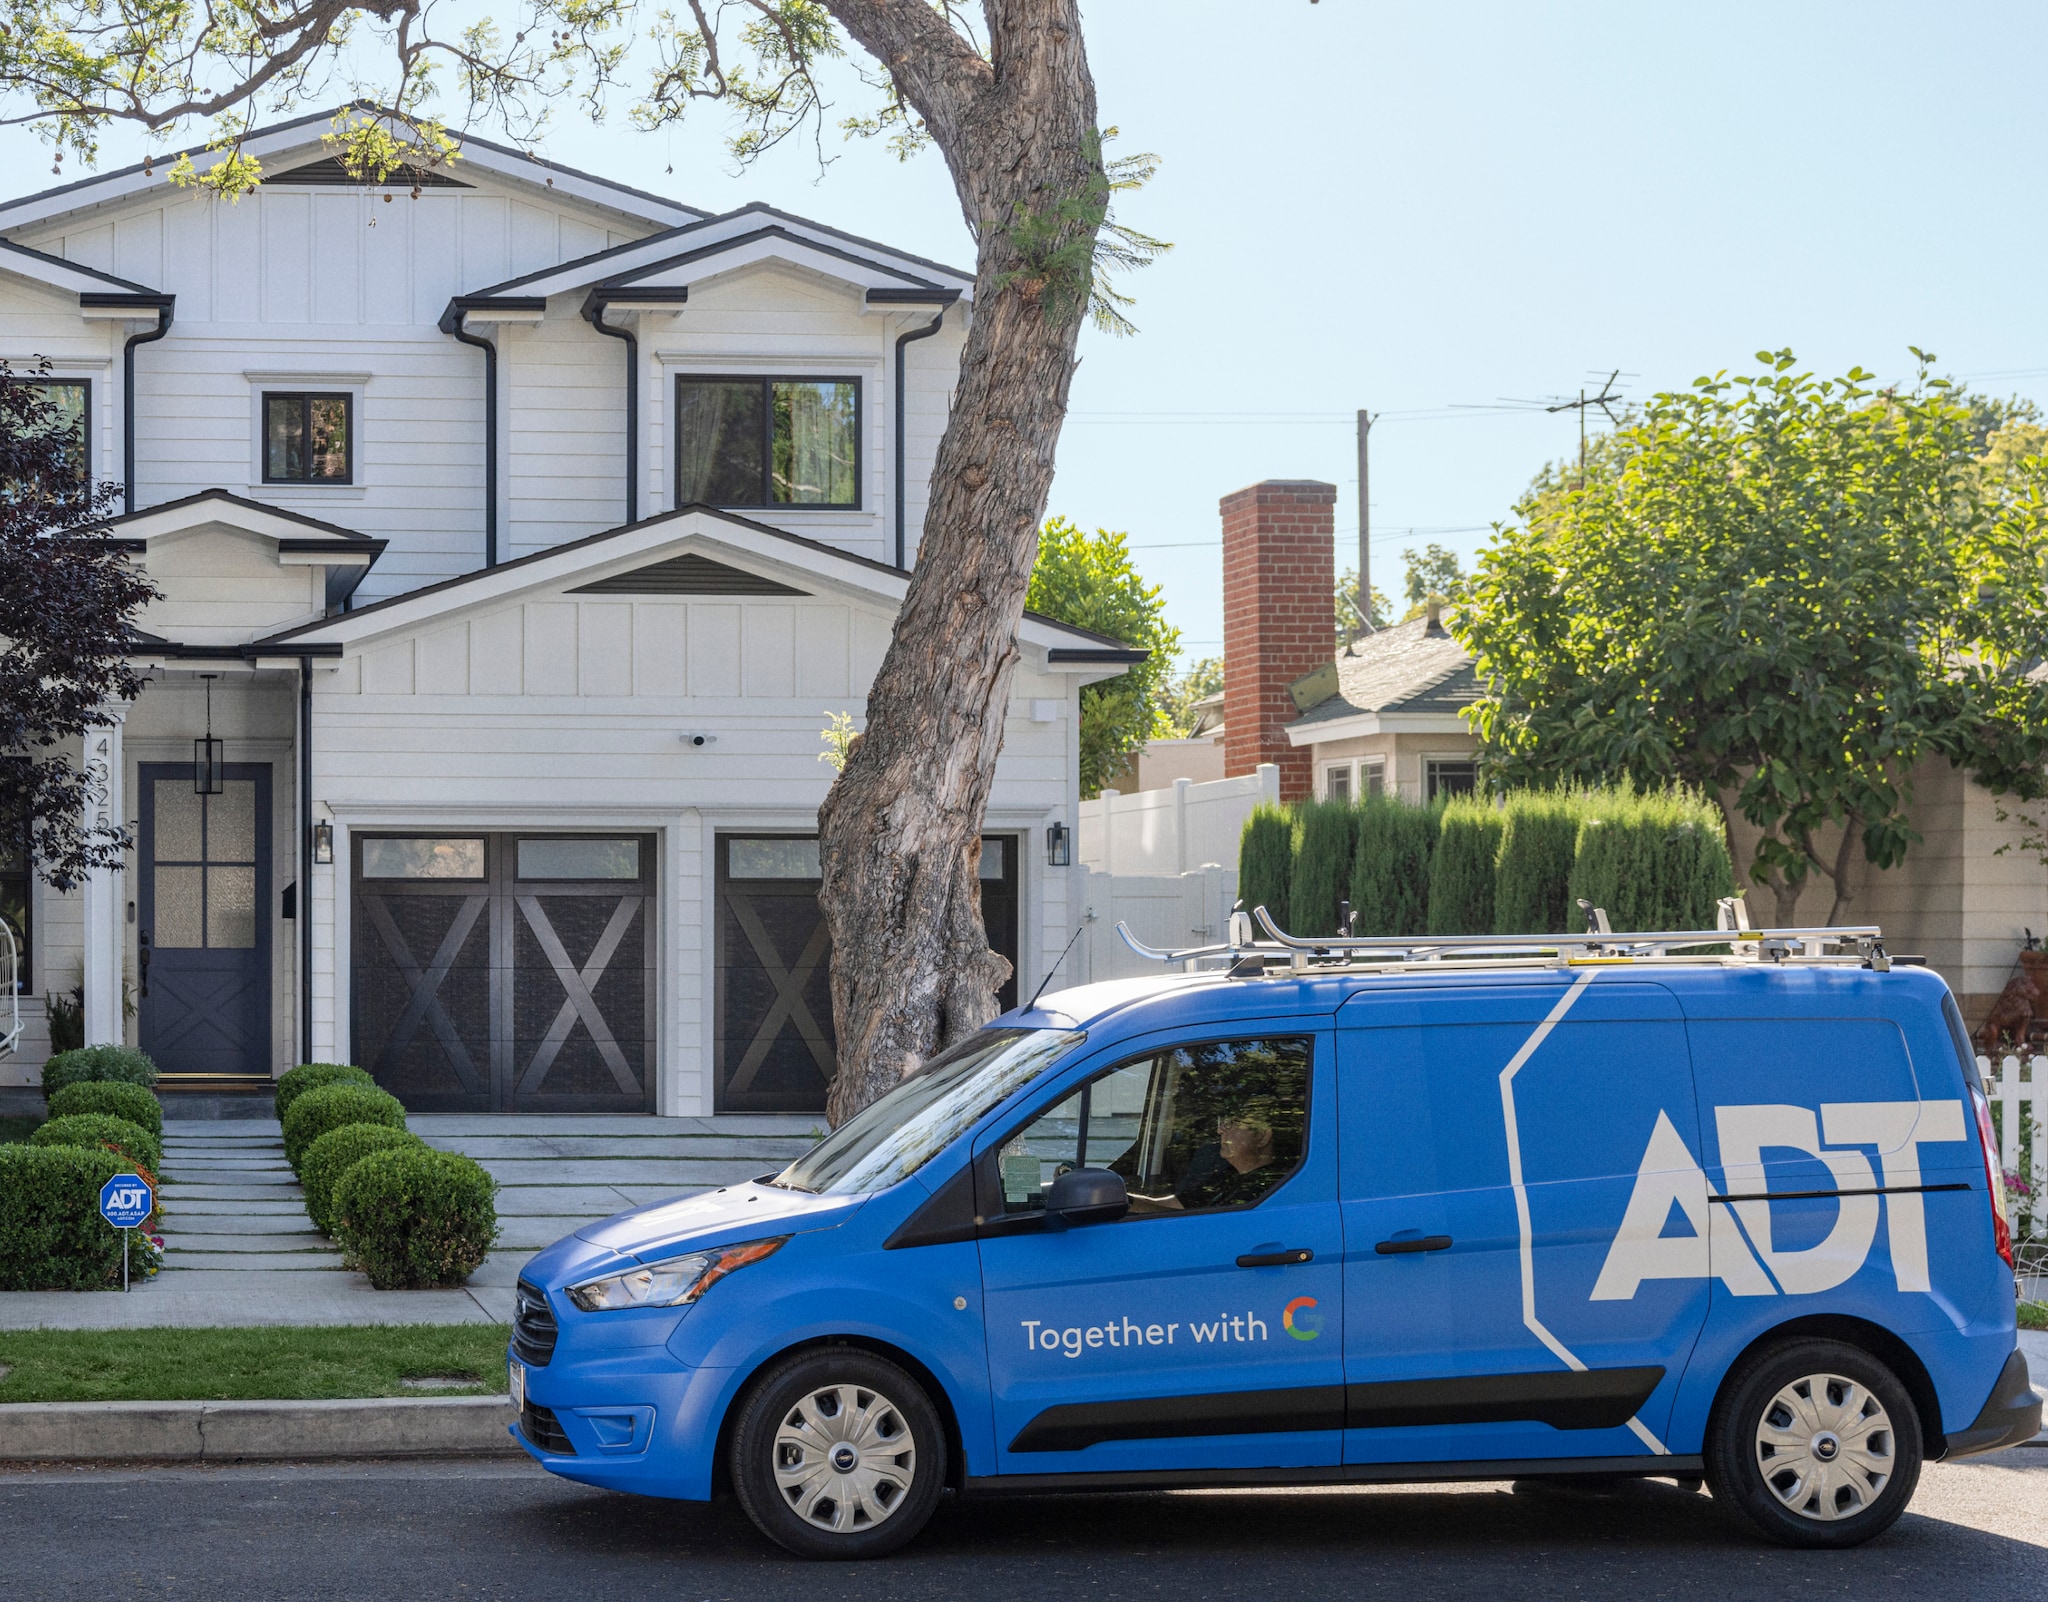 ADT van outside of someone's house